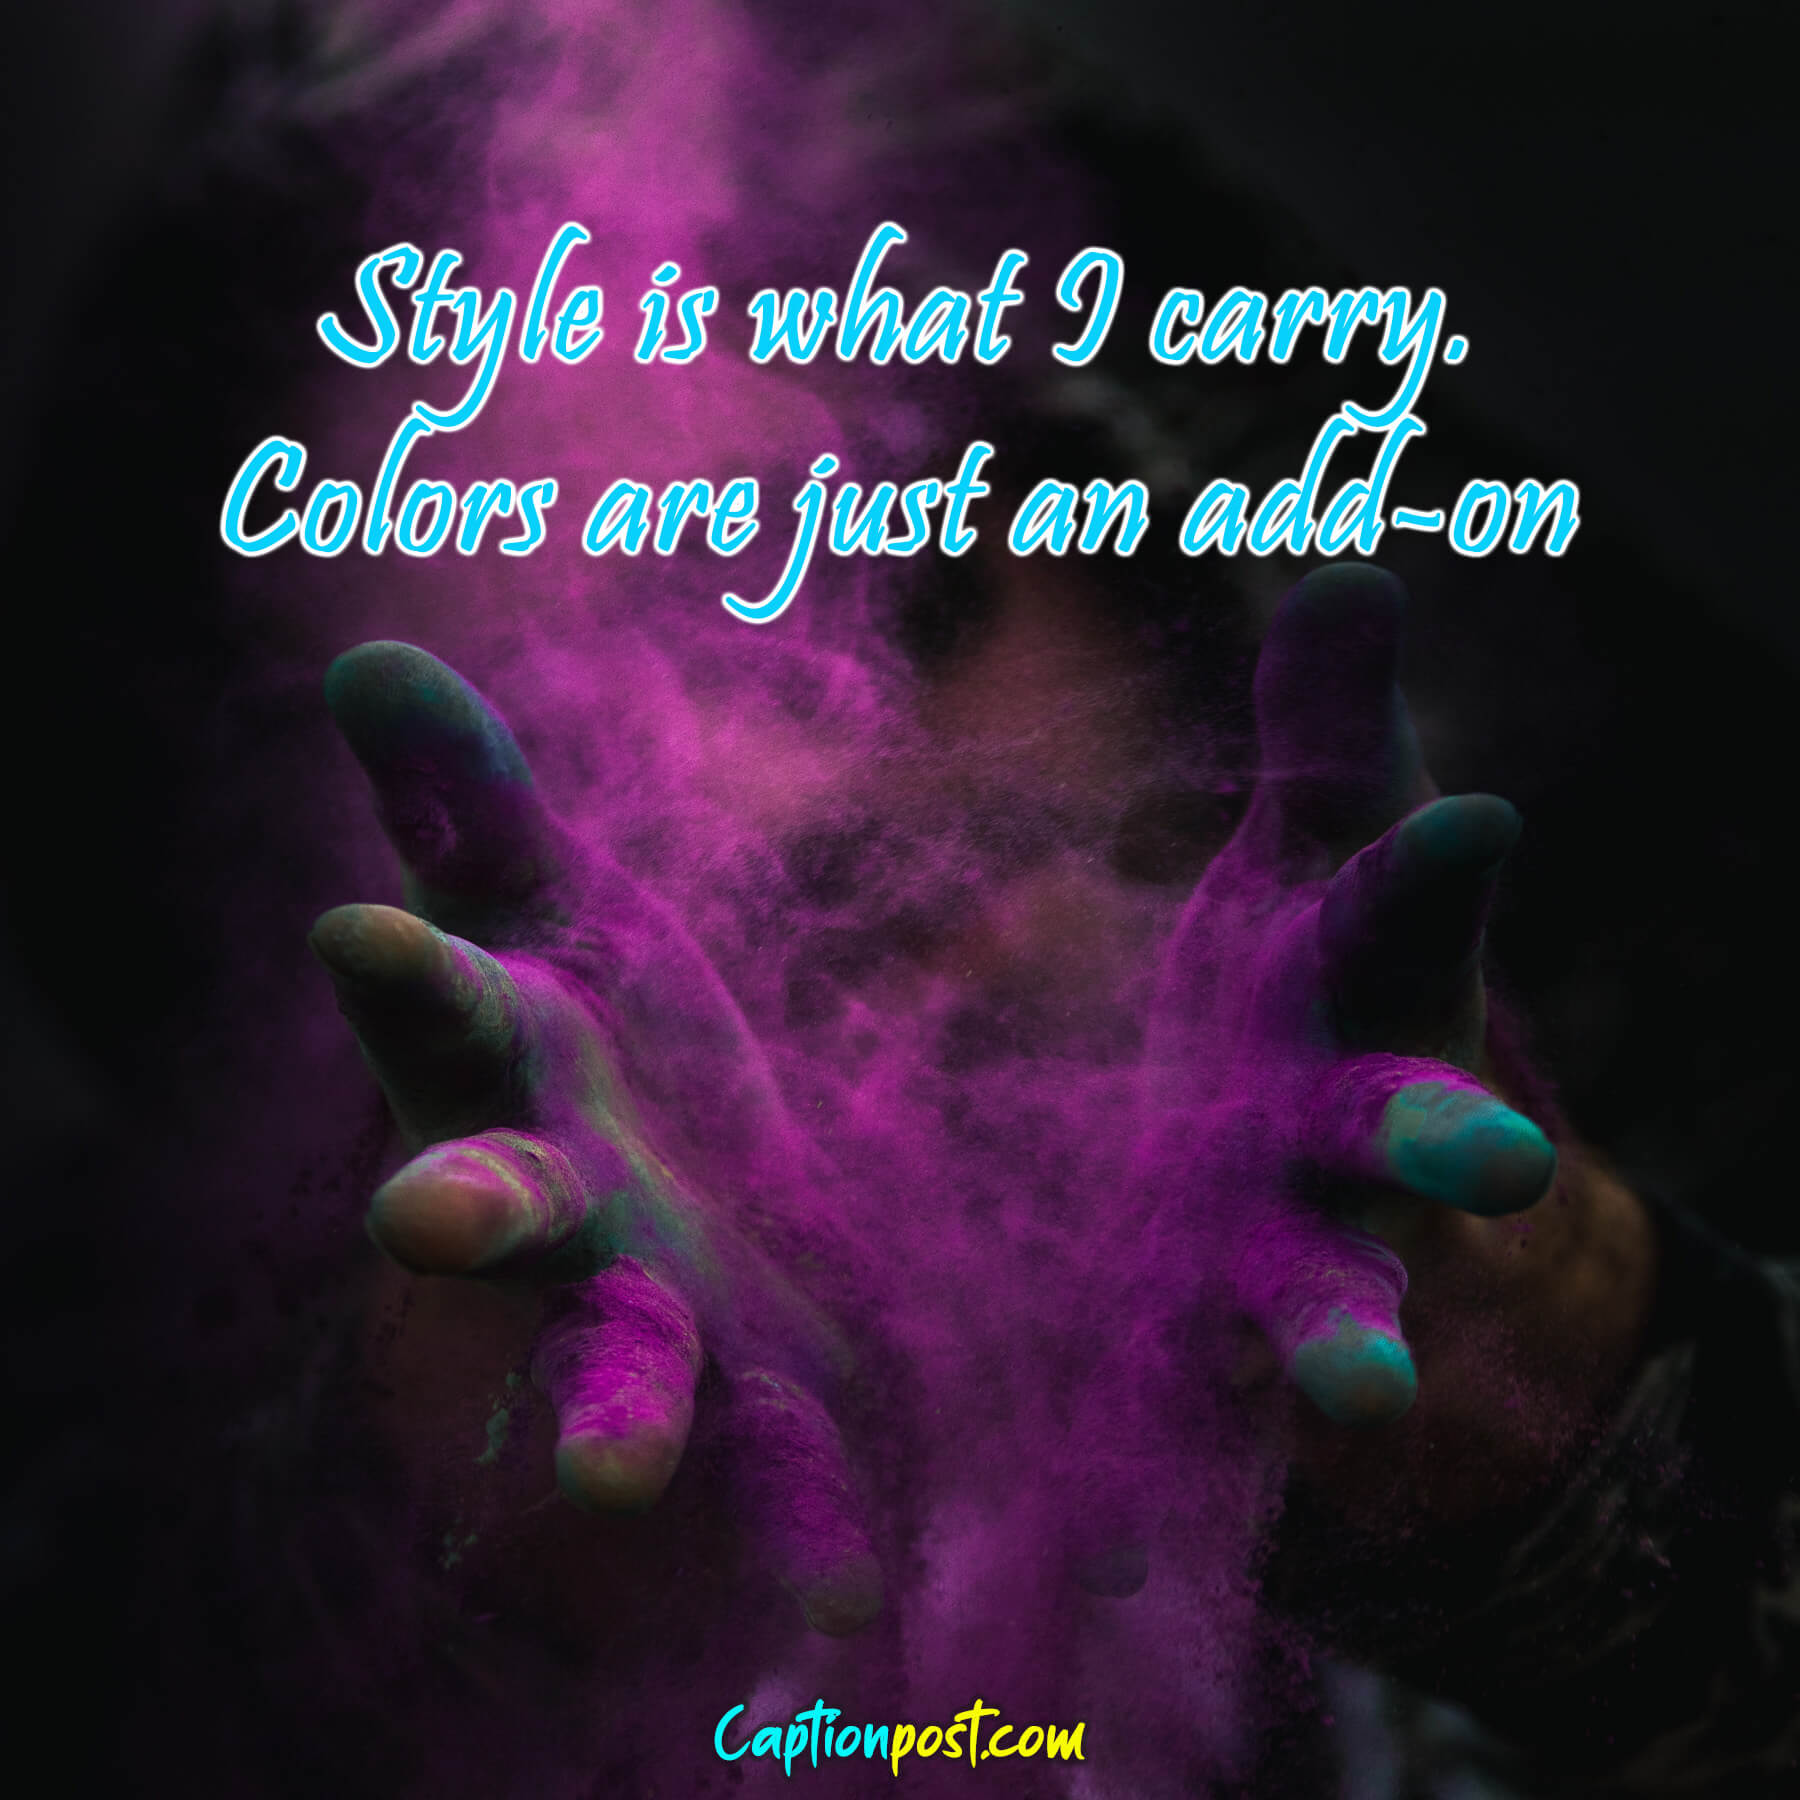 Style is what I carry. Colors are just an add-on.